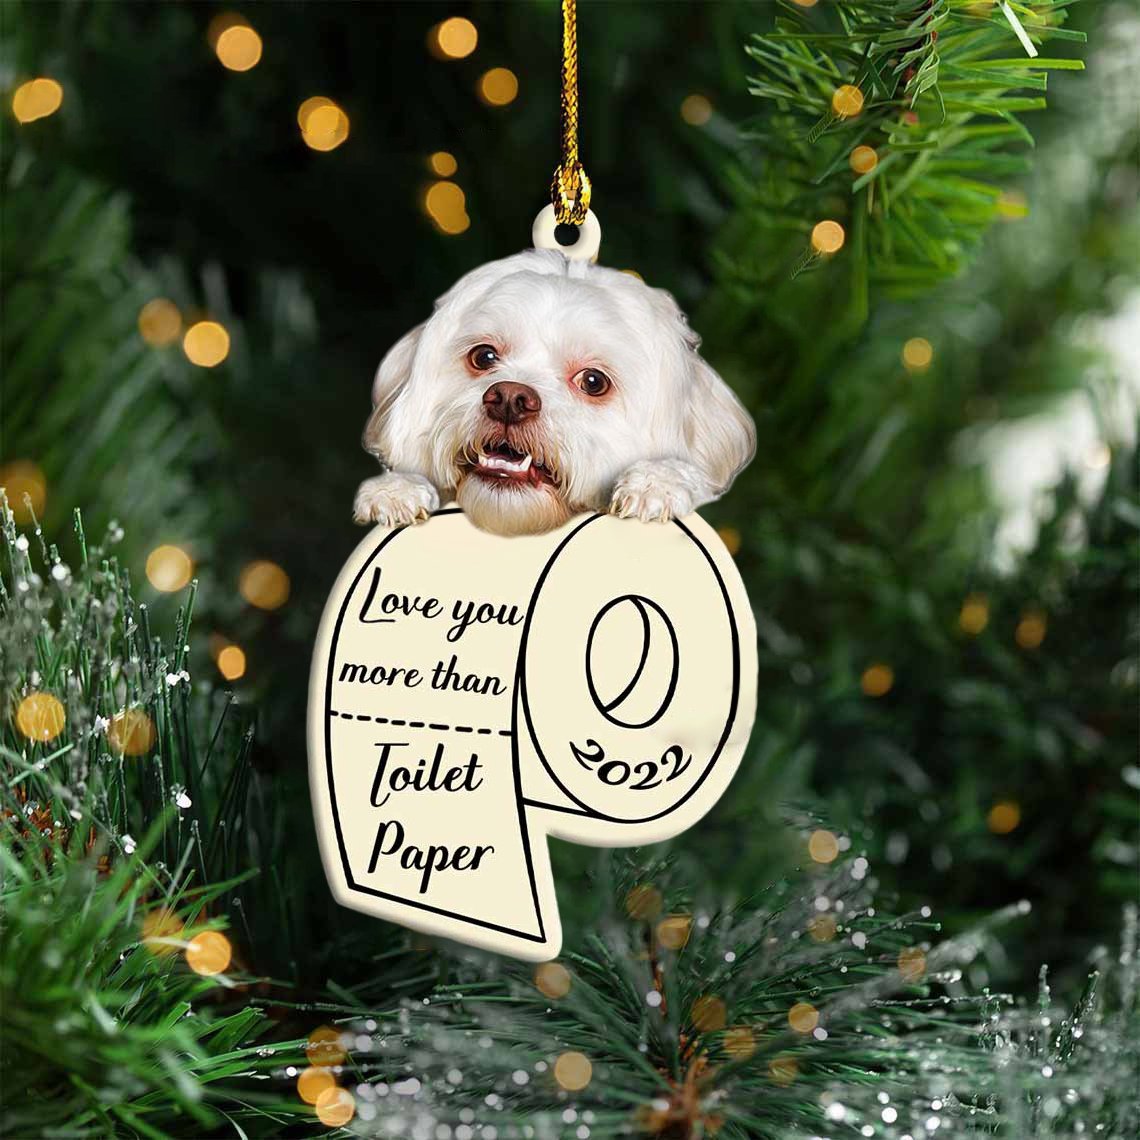 Lhasa Apso Love You More Than Toilet Paper 2022 Hanging Ornament